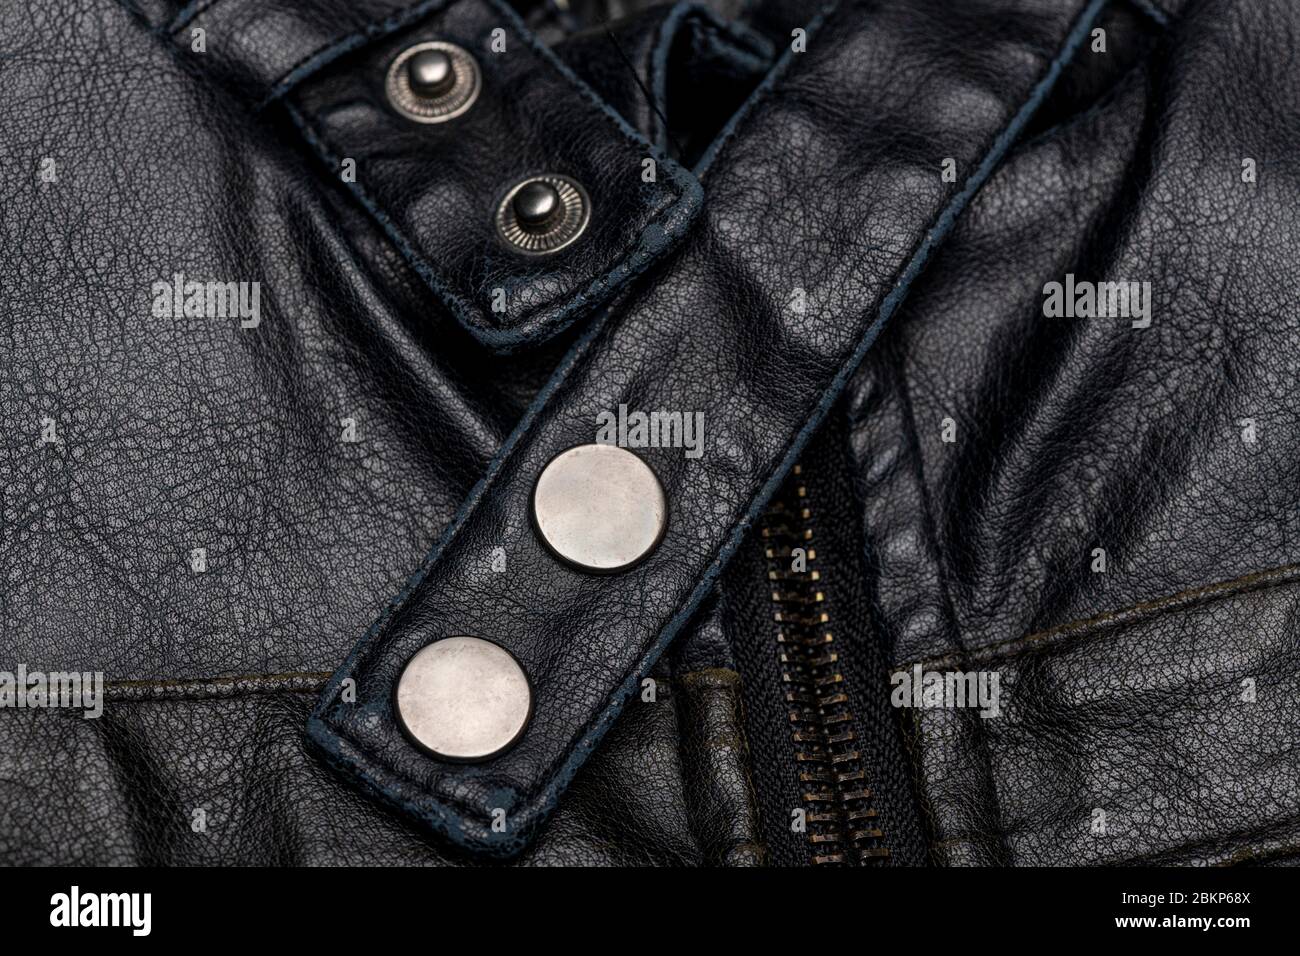 close up of a black leather vintage motorcycle jacket, zipper and press studs. Stock Photo